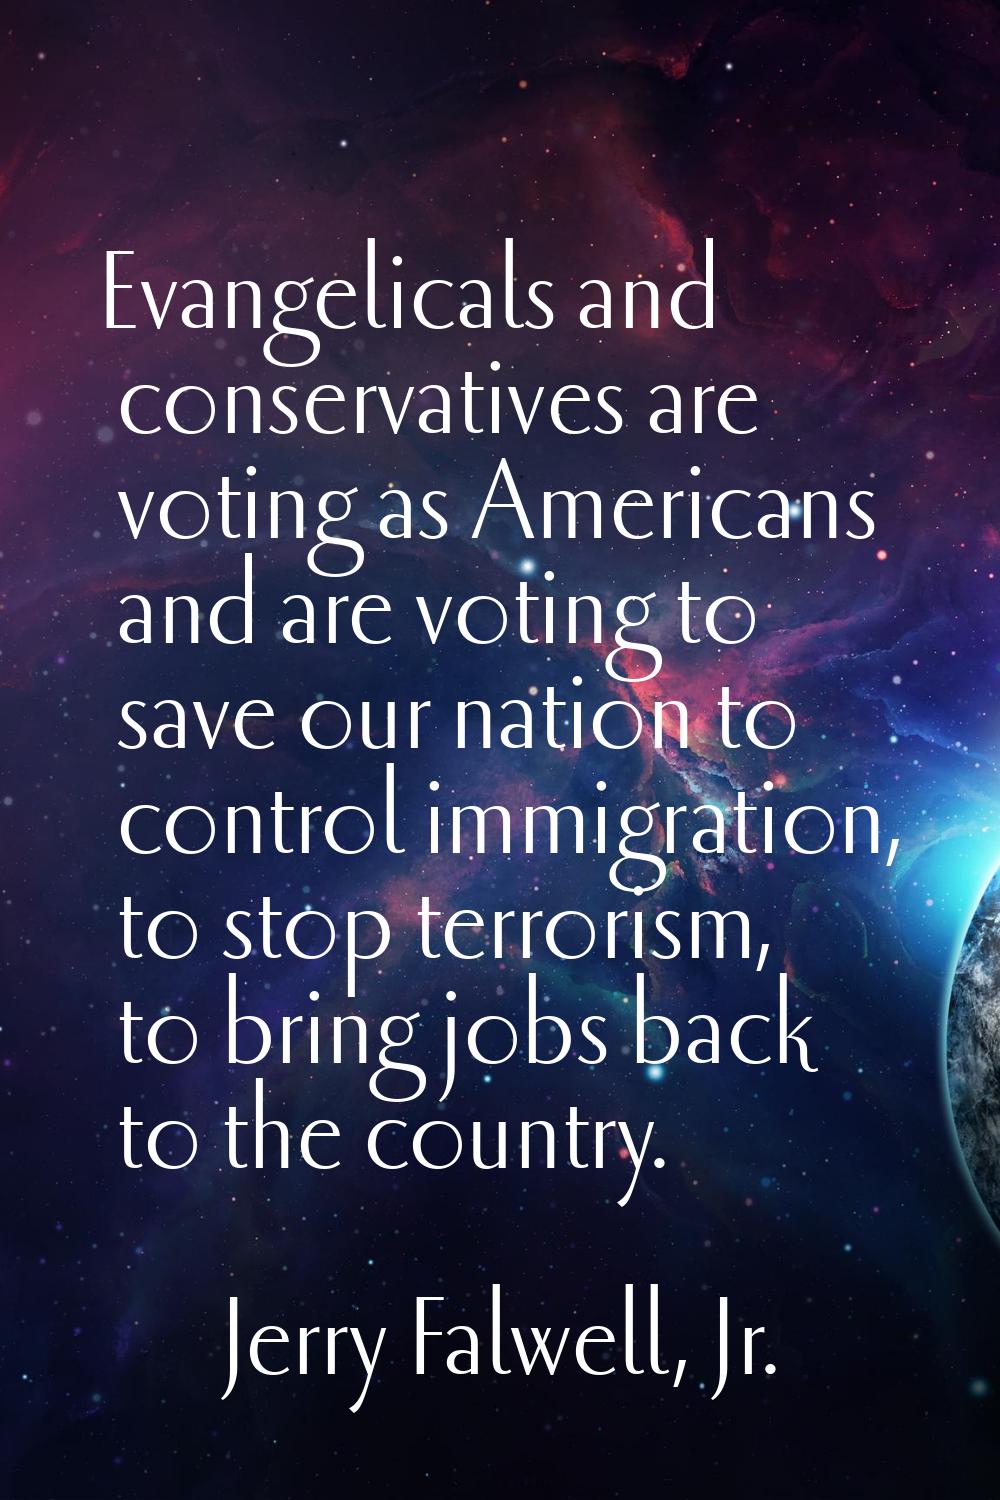 Evangelicals and conservatives are voting as Americans and are voting to save our nation to control